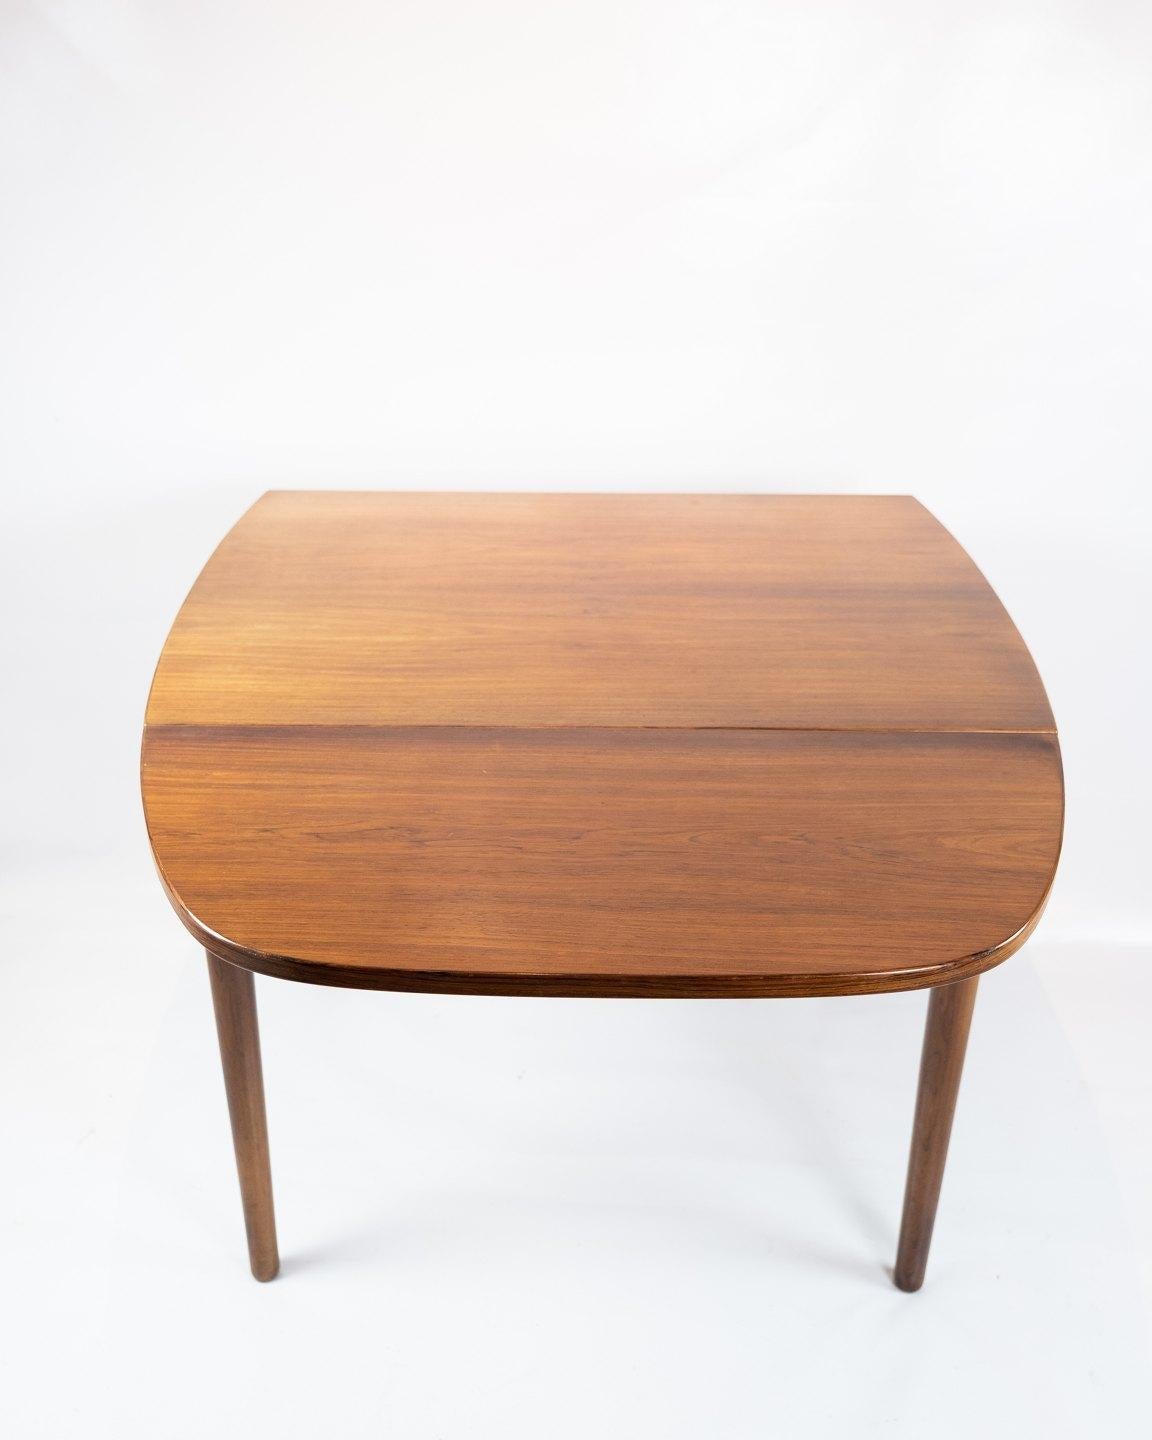 Mid-20th Century Smaller Dining Table in Rosewood with Extentions of Danish Design from the 1960s For Sale